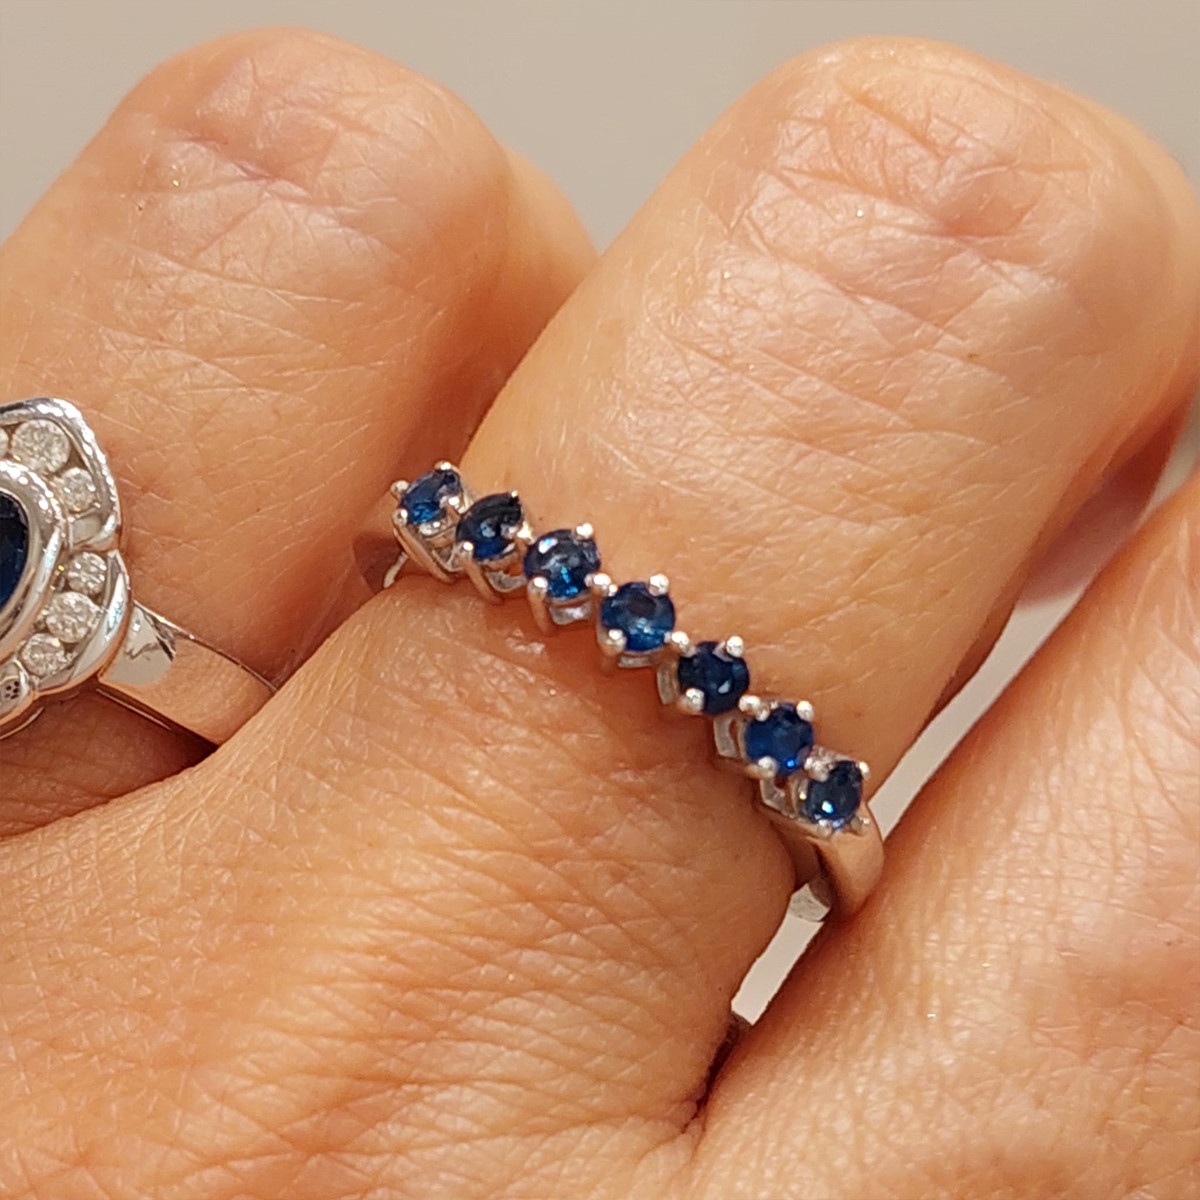 WHITE GOLD RING WITH 7 SAPPHIRES